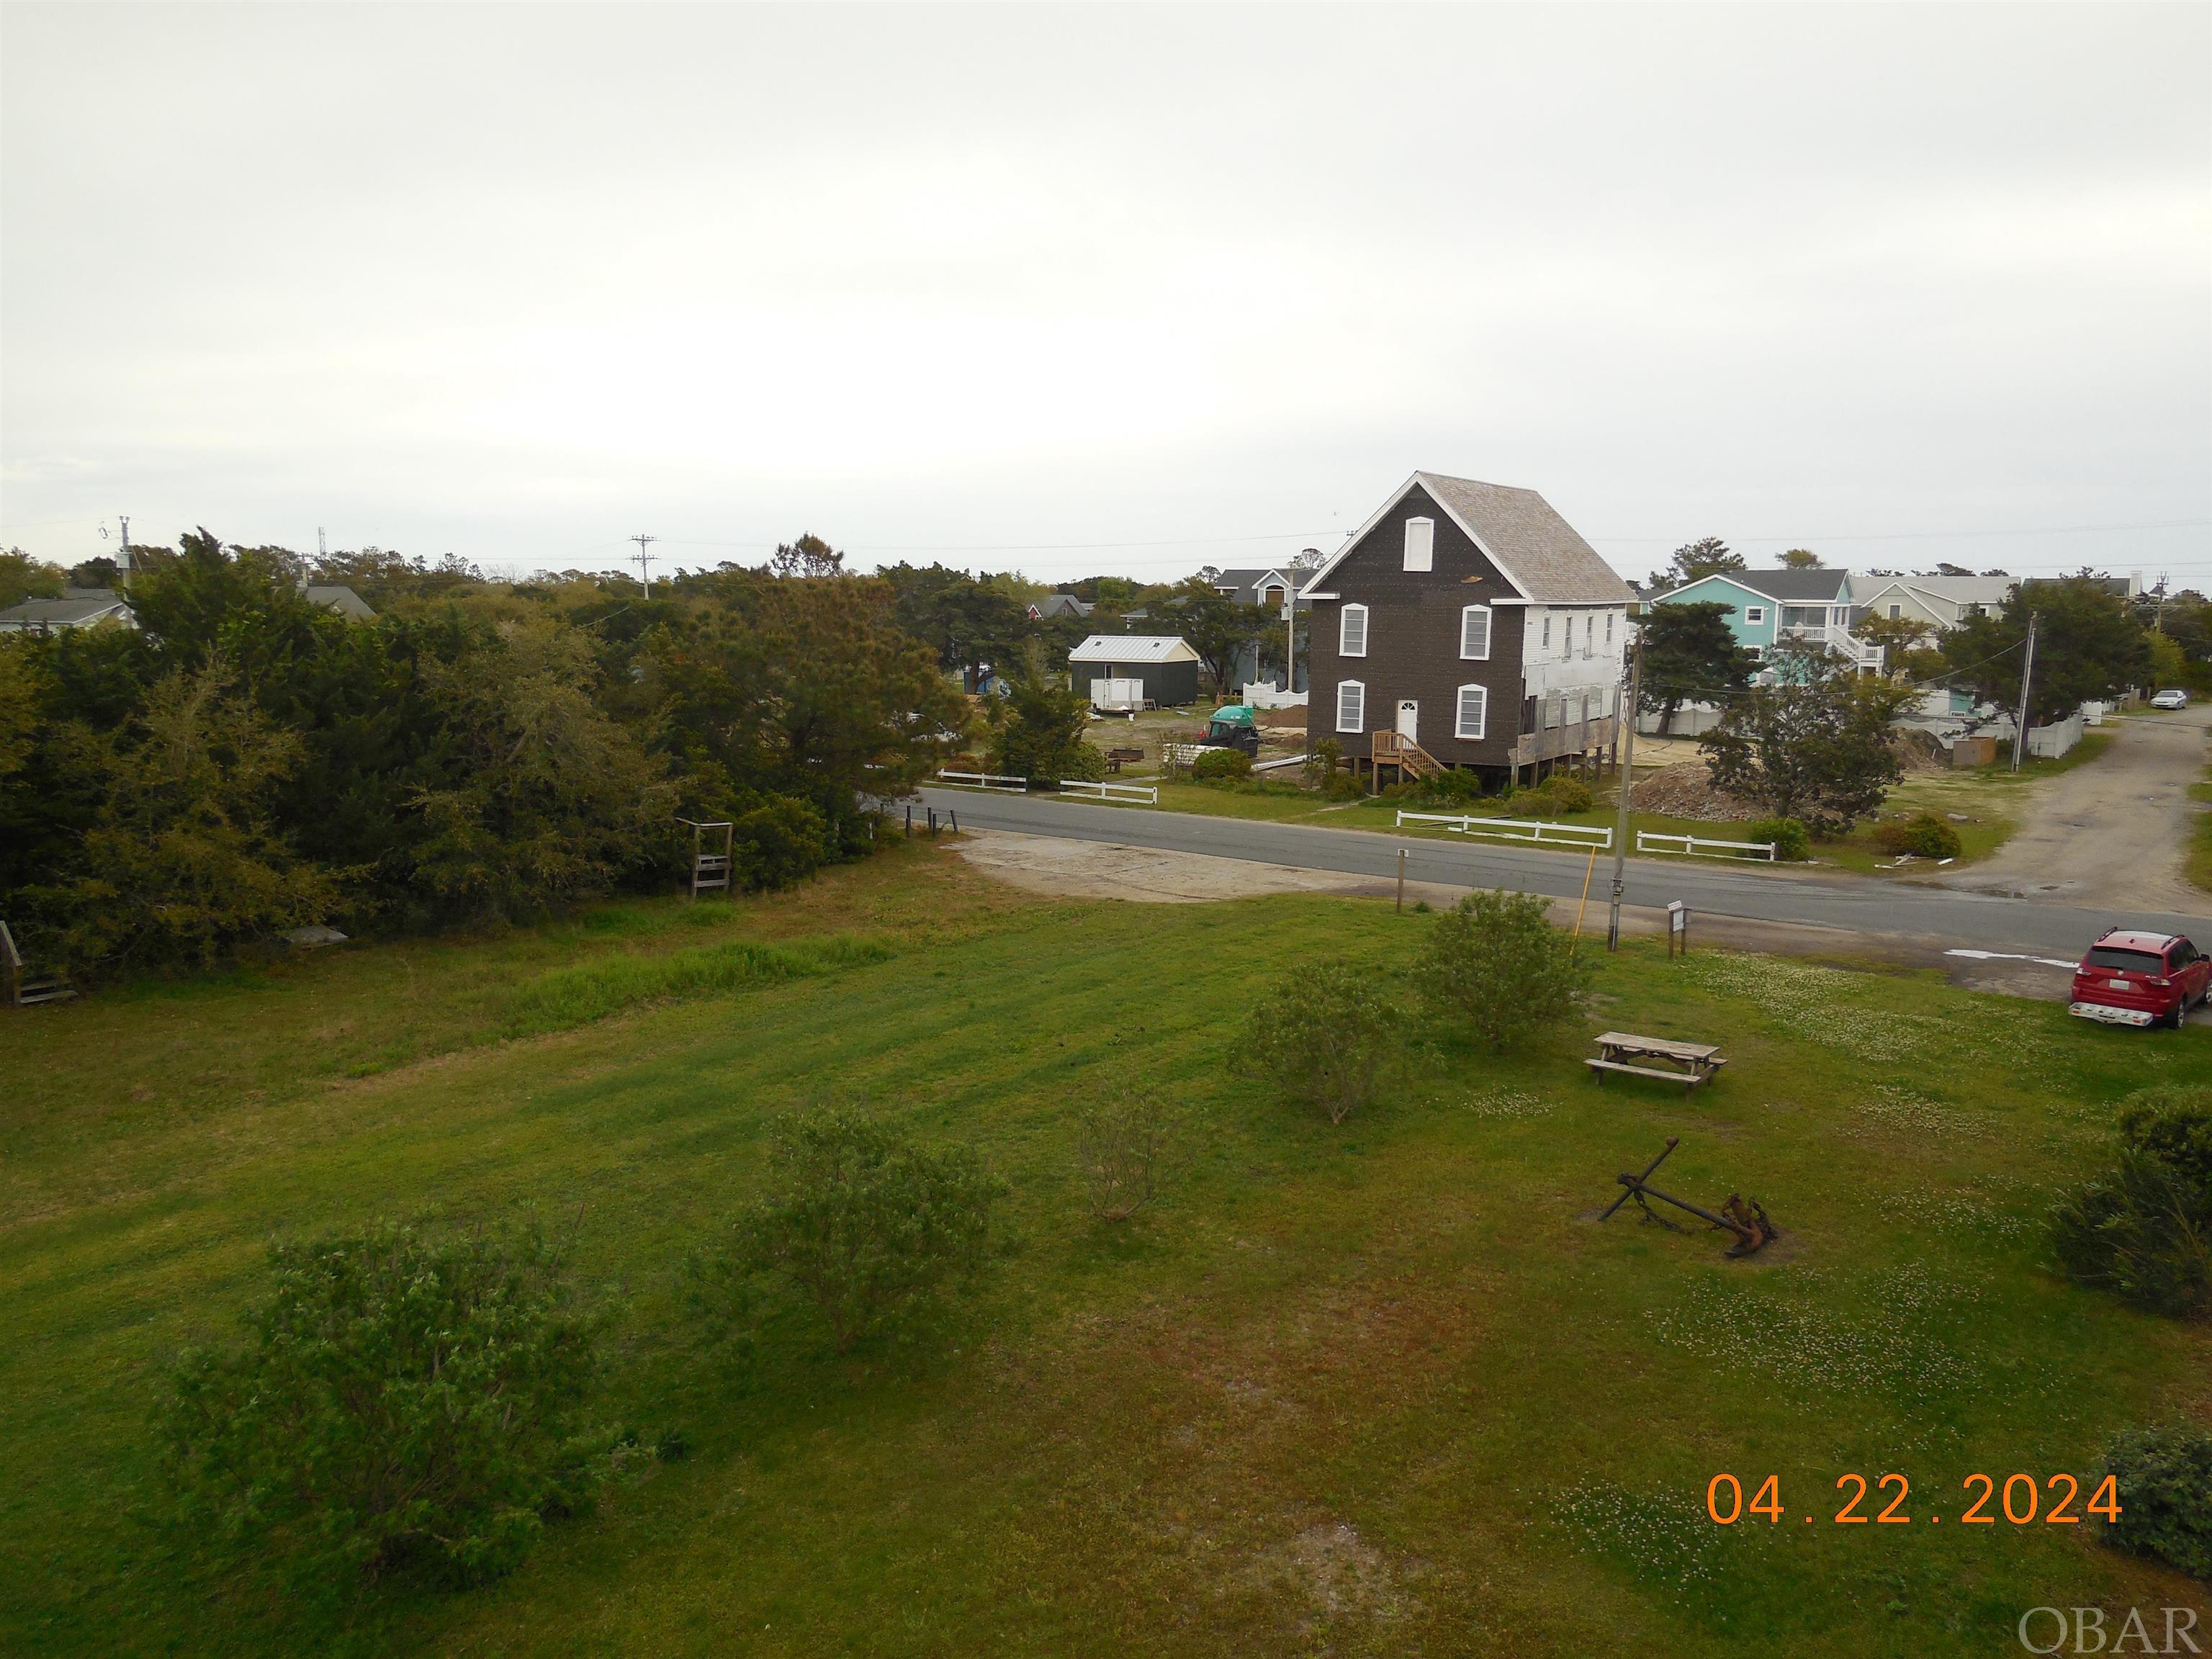 50 Lighthouse Road, Ocracoke, NC 27960, 2 Bedrooms Bedrooms, ,2 BathroomsBathrooms,Residential,For sale,Lighthouse Road,125425